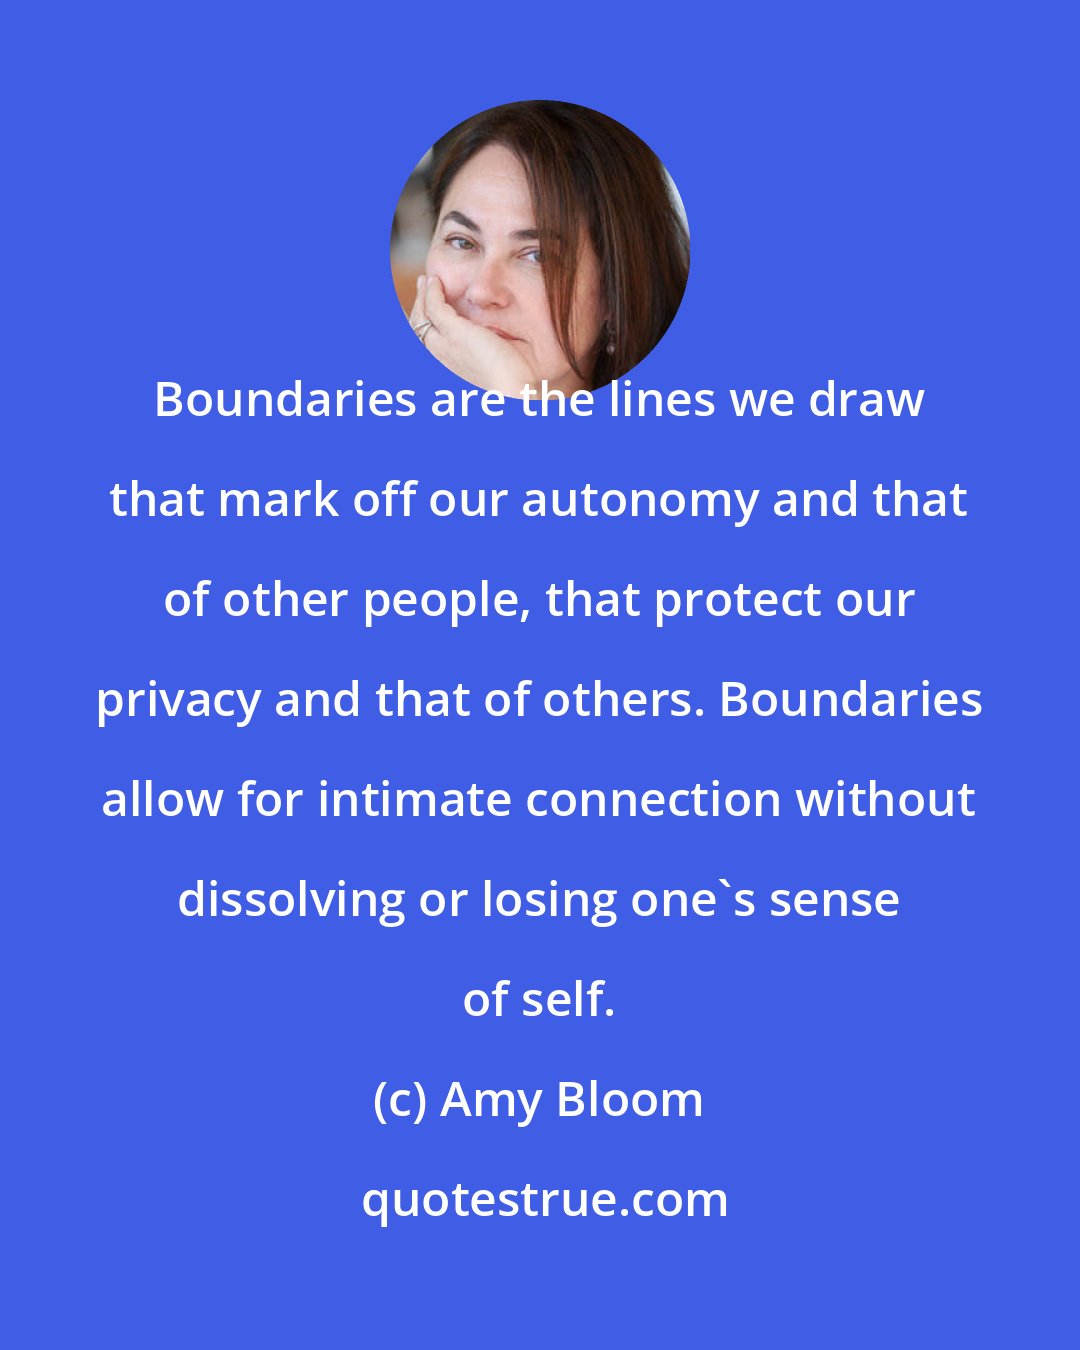 Amy Bloom: Boundaries are the lines we draw that mark off our autonomy and that of other people, that protect our privacy and that of others. Boundaries allow for intimate connection without dissolving or losing one's sense of self.